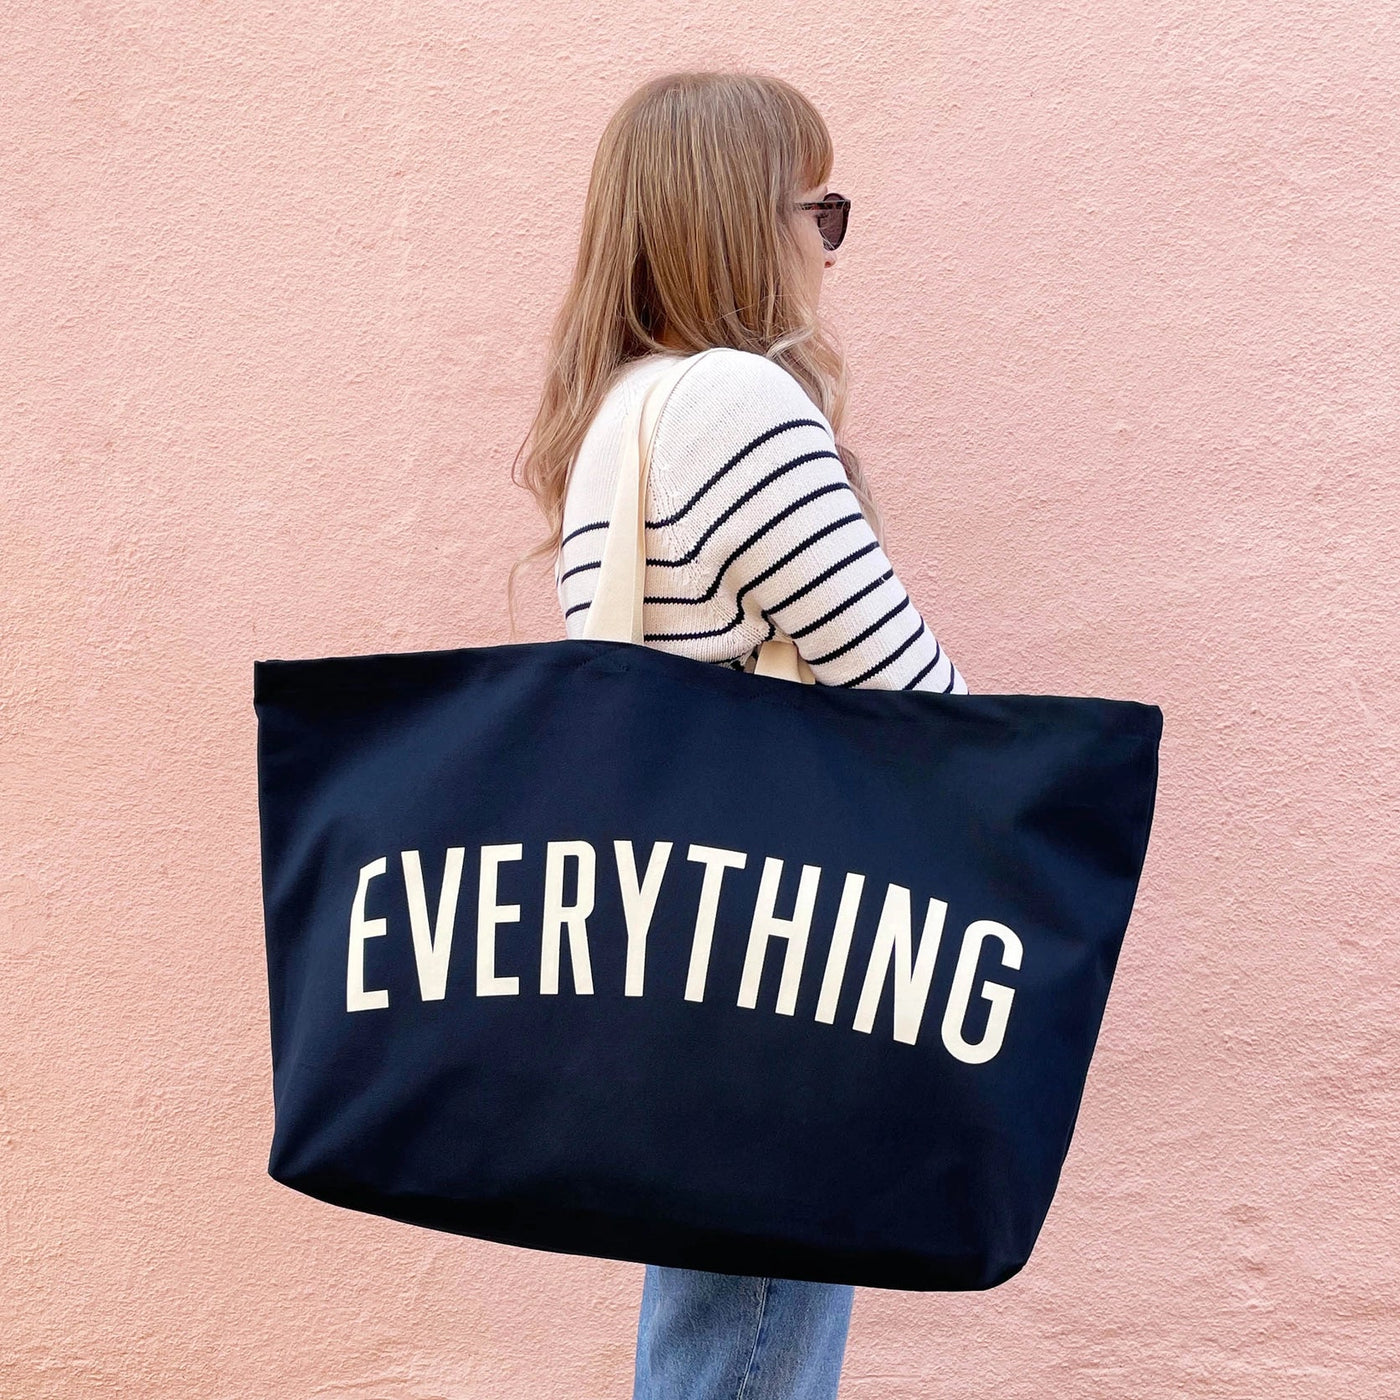 Everything - Midnight Blue REALLY Big Bag by Alphabet Bags - Petite Belle